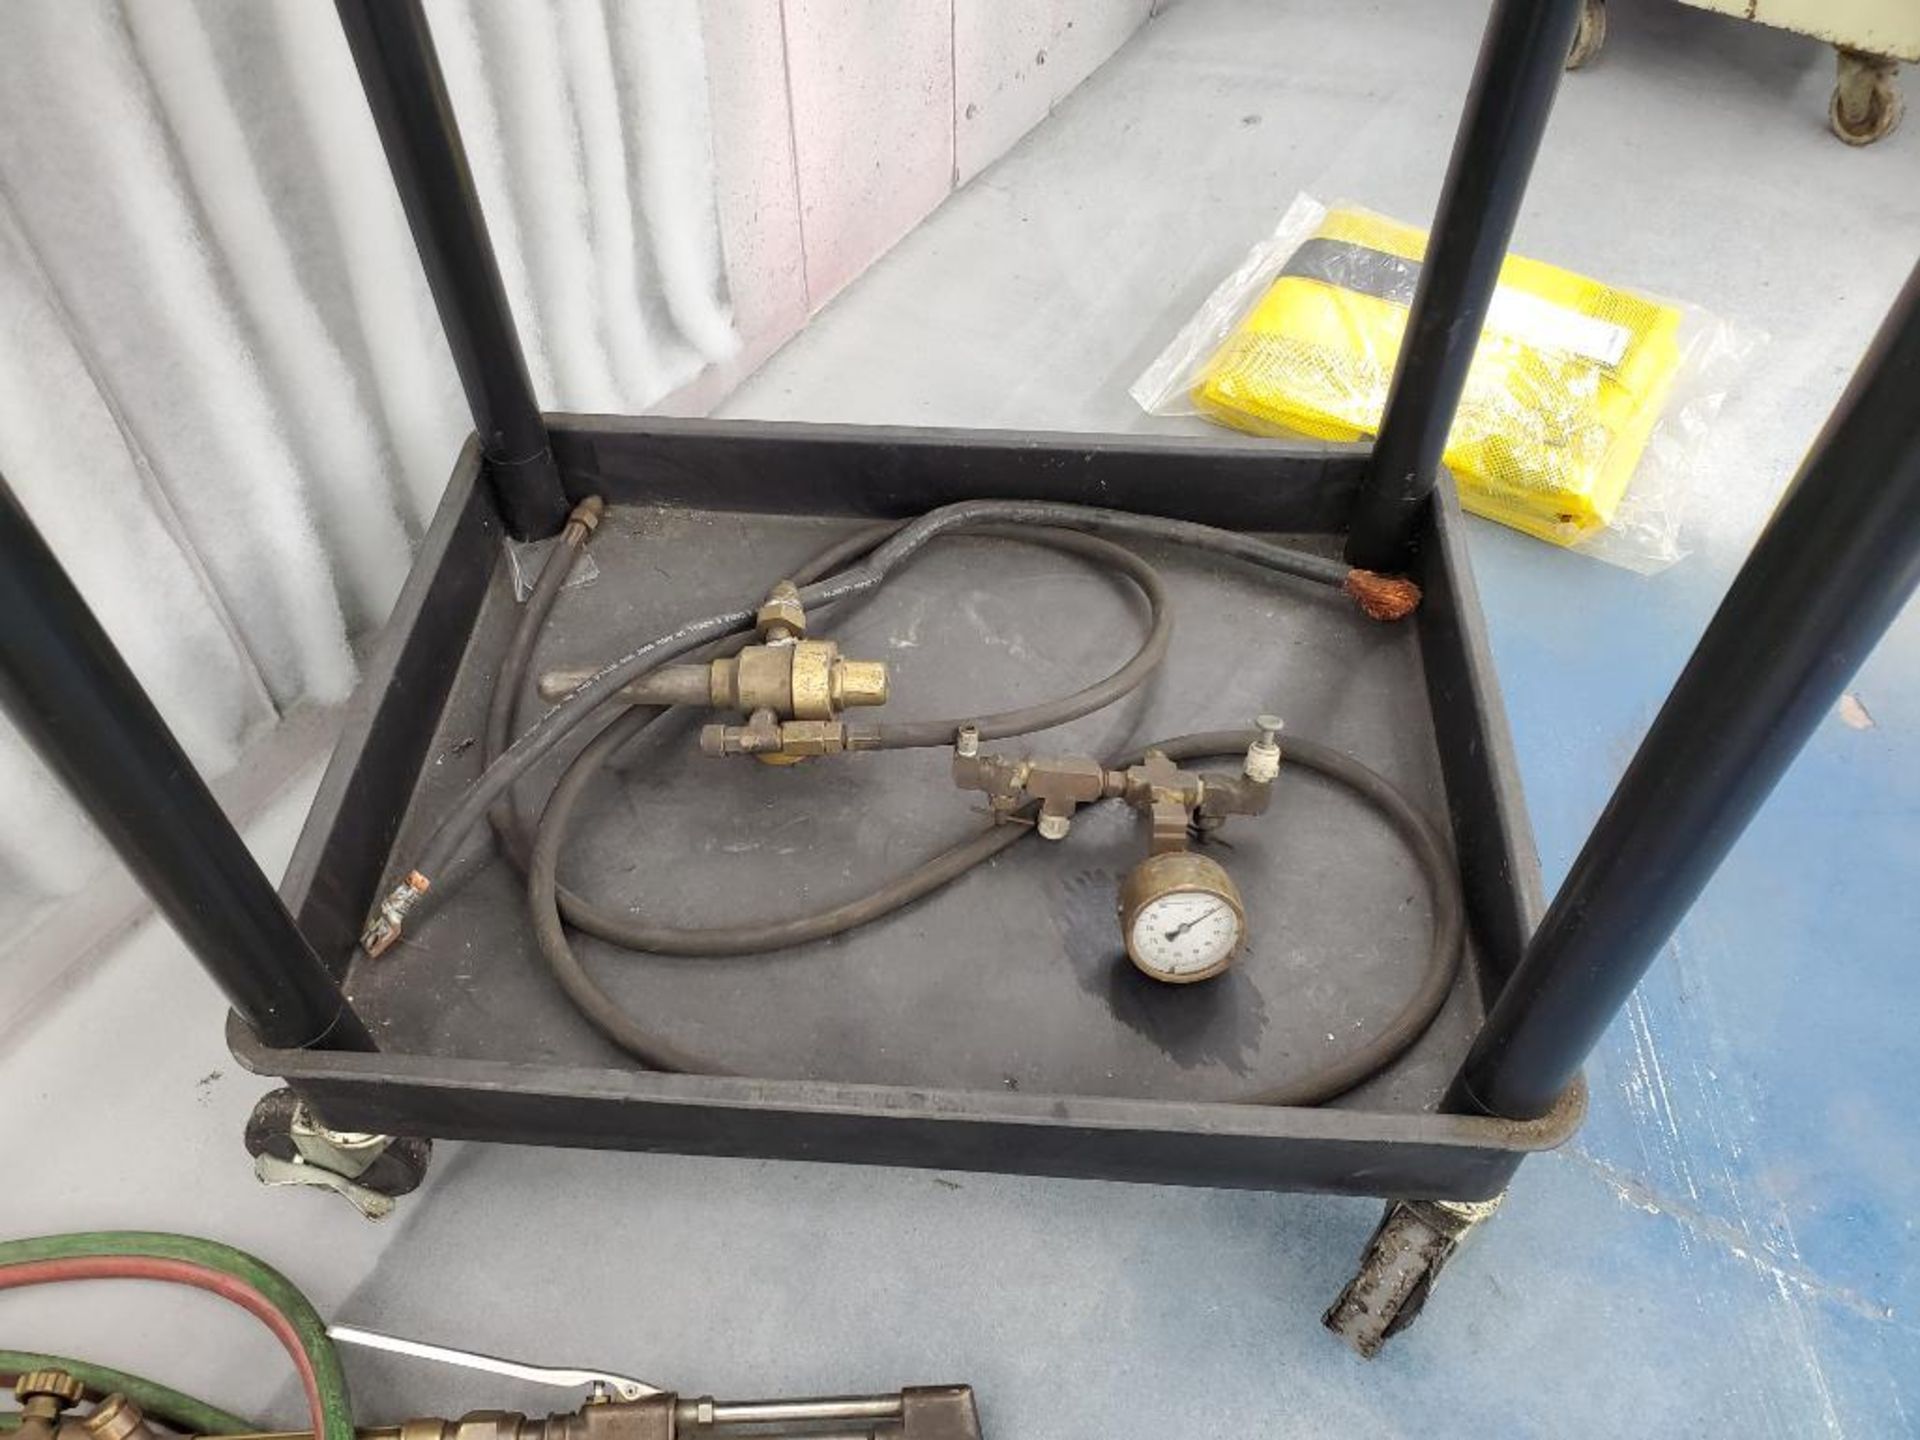 Victor Portable Oxy/Acetylene Welding/Cutting Outfit, Torch Head w/ Hose & Gauges, Cart w/ Wire Gun - Image 7 of 7